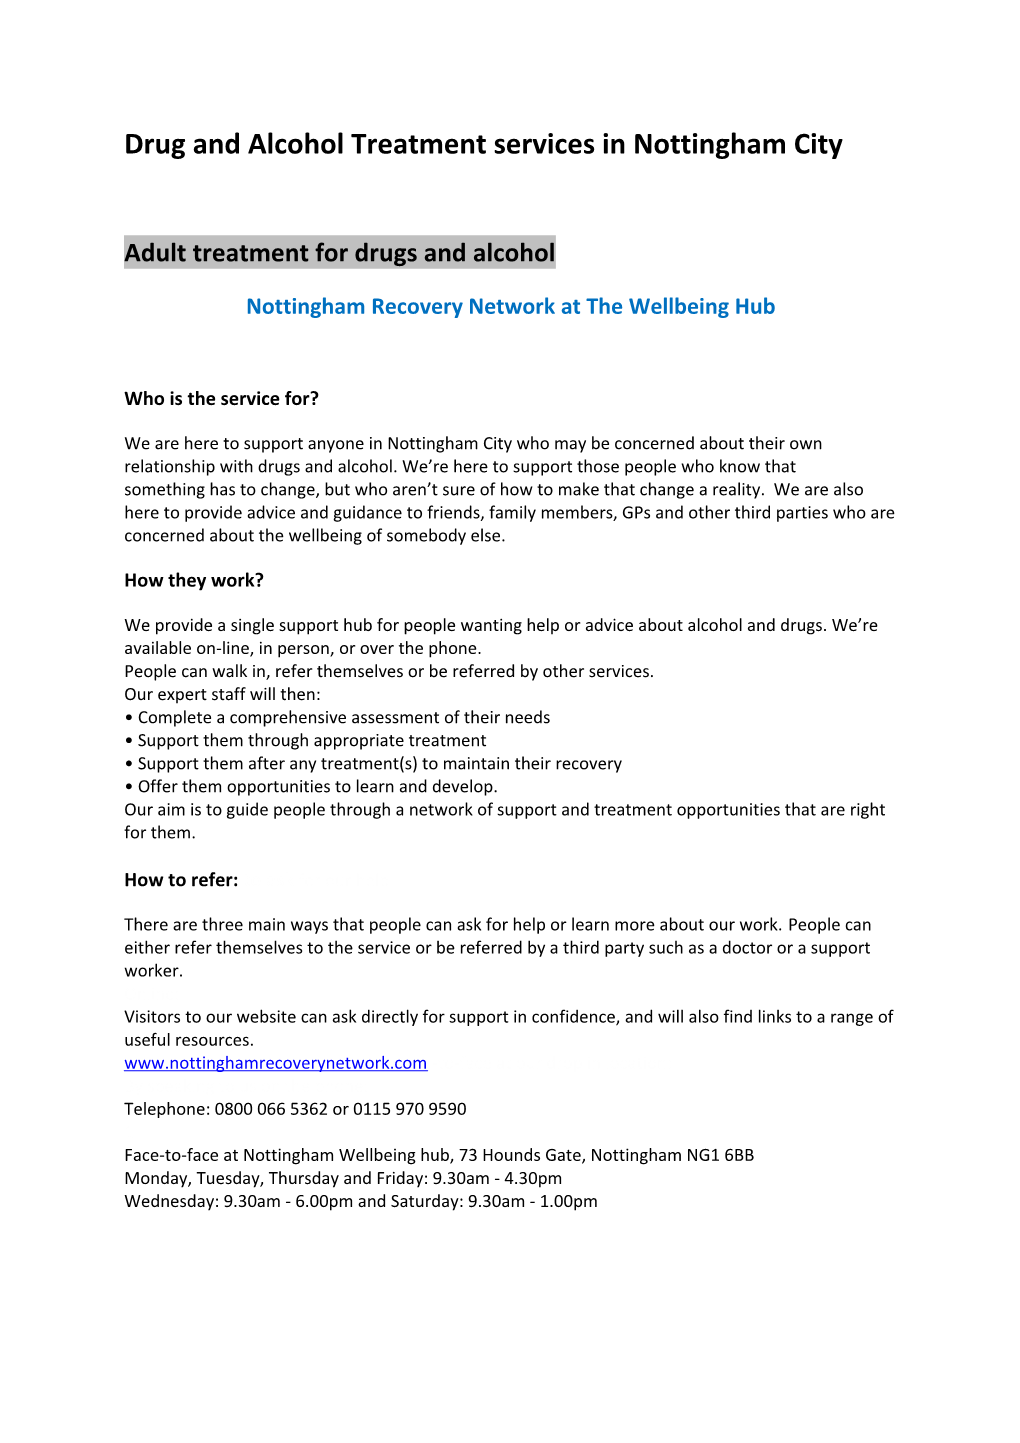 Drug and Alcohol Treatment Services in Nottingham City